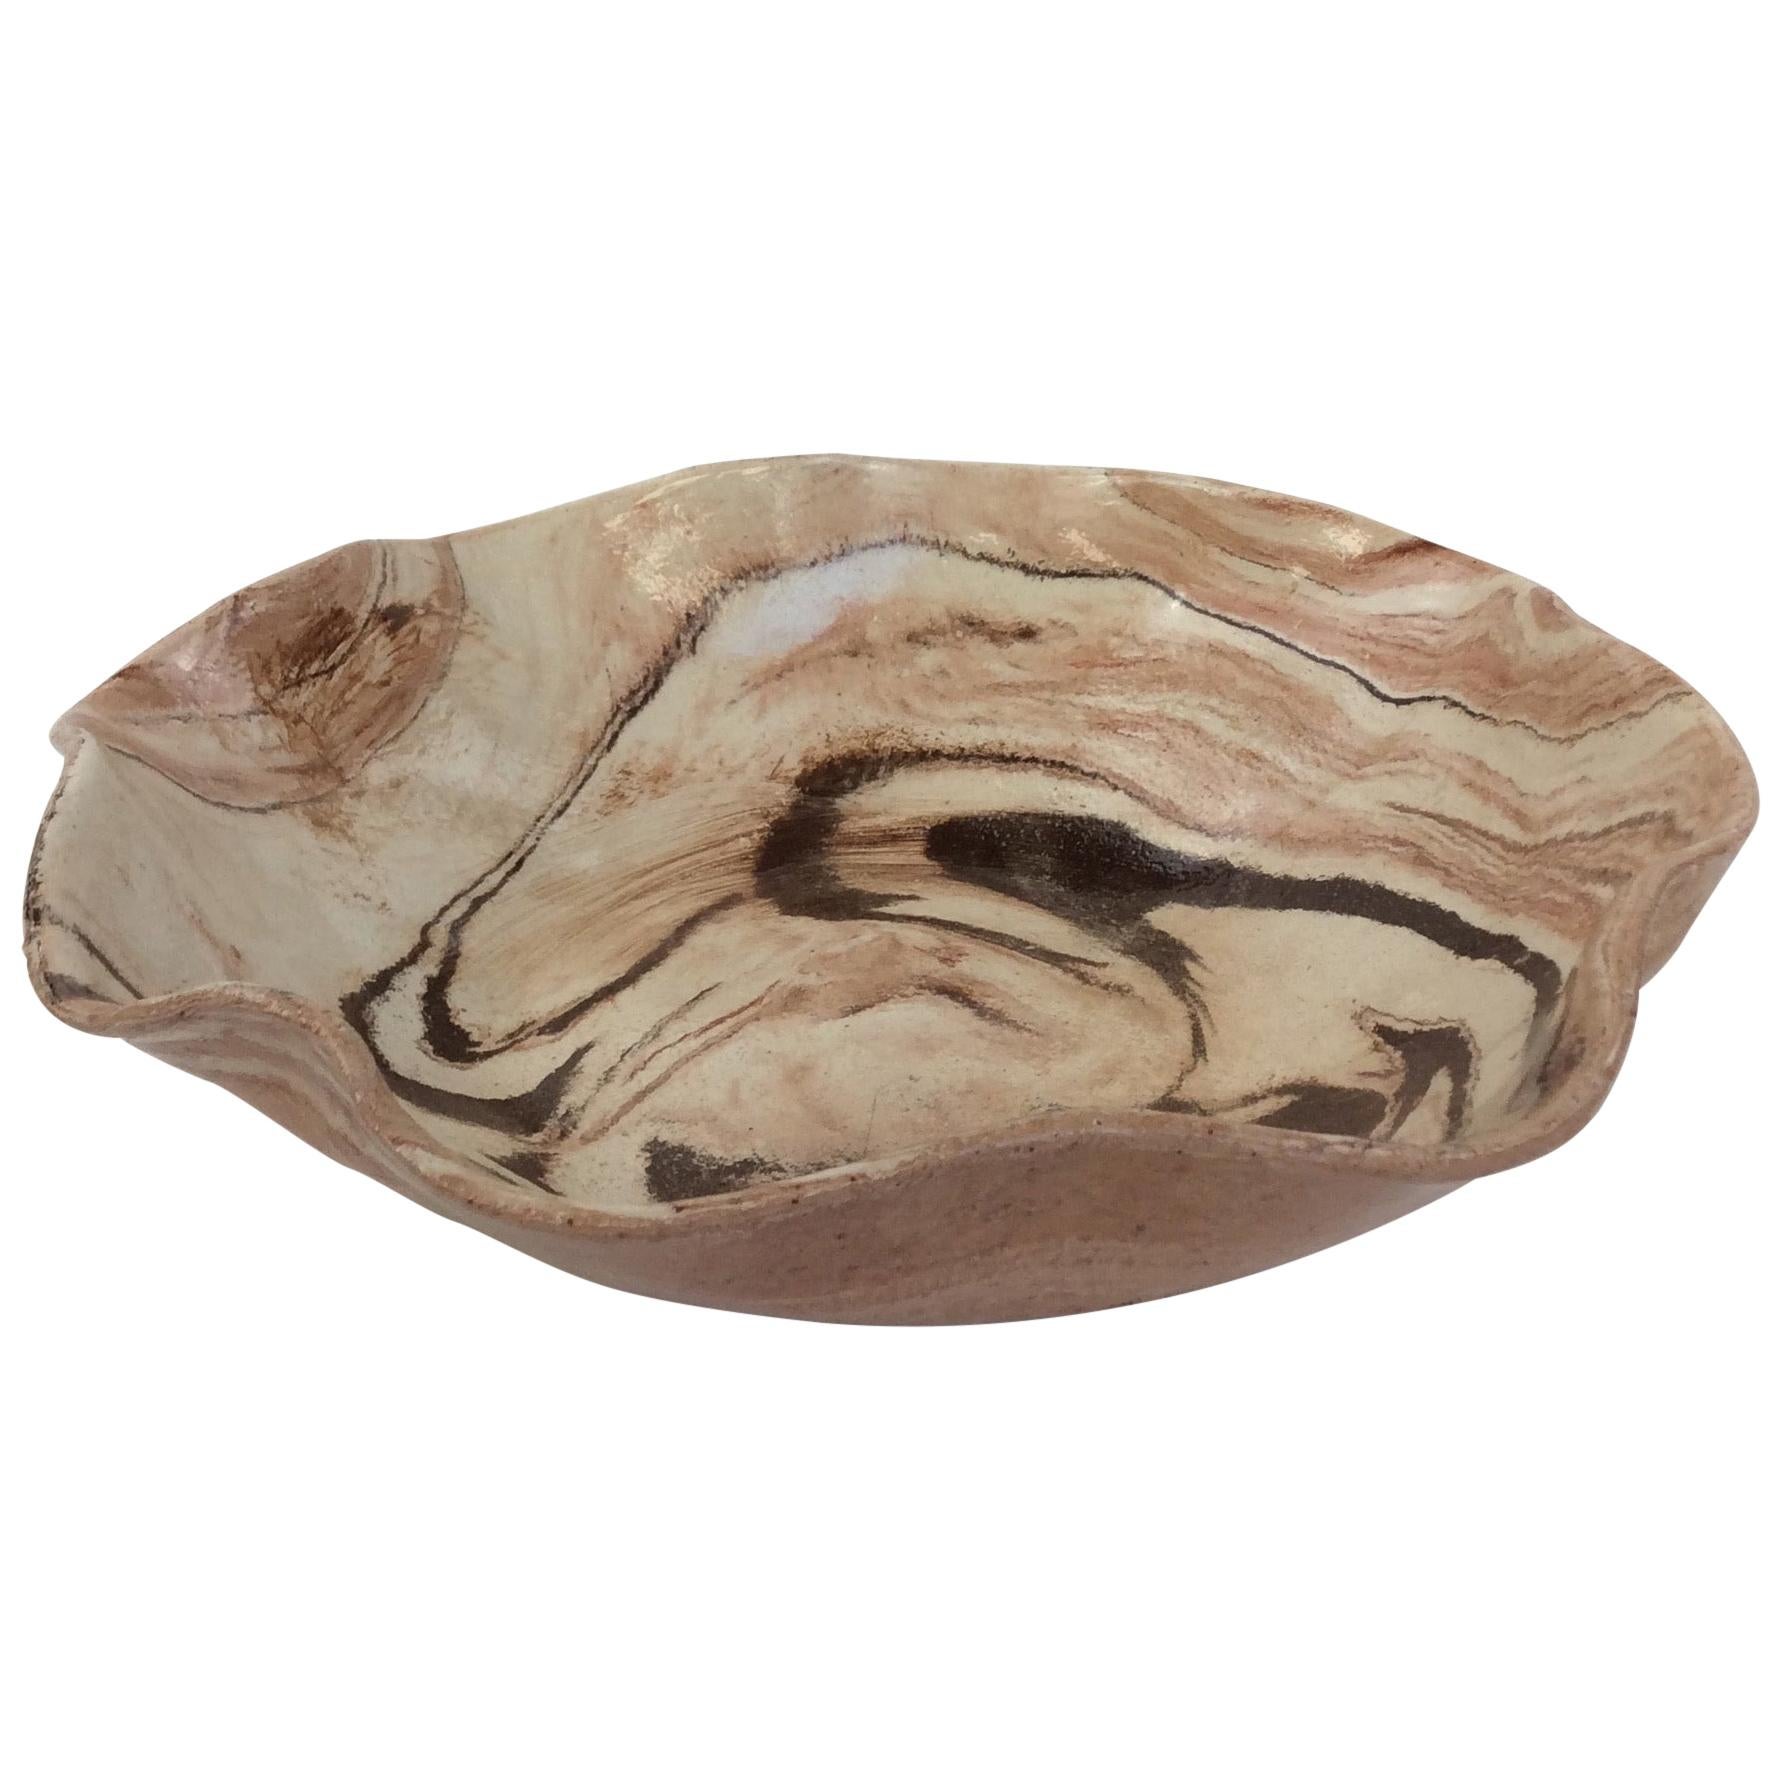 Decorative Apt Mixed Earths Bowl or Large Vide Poche For Sale